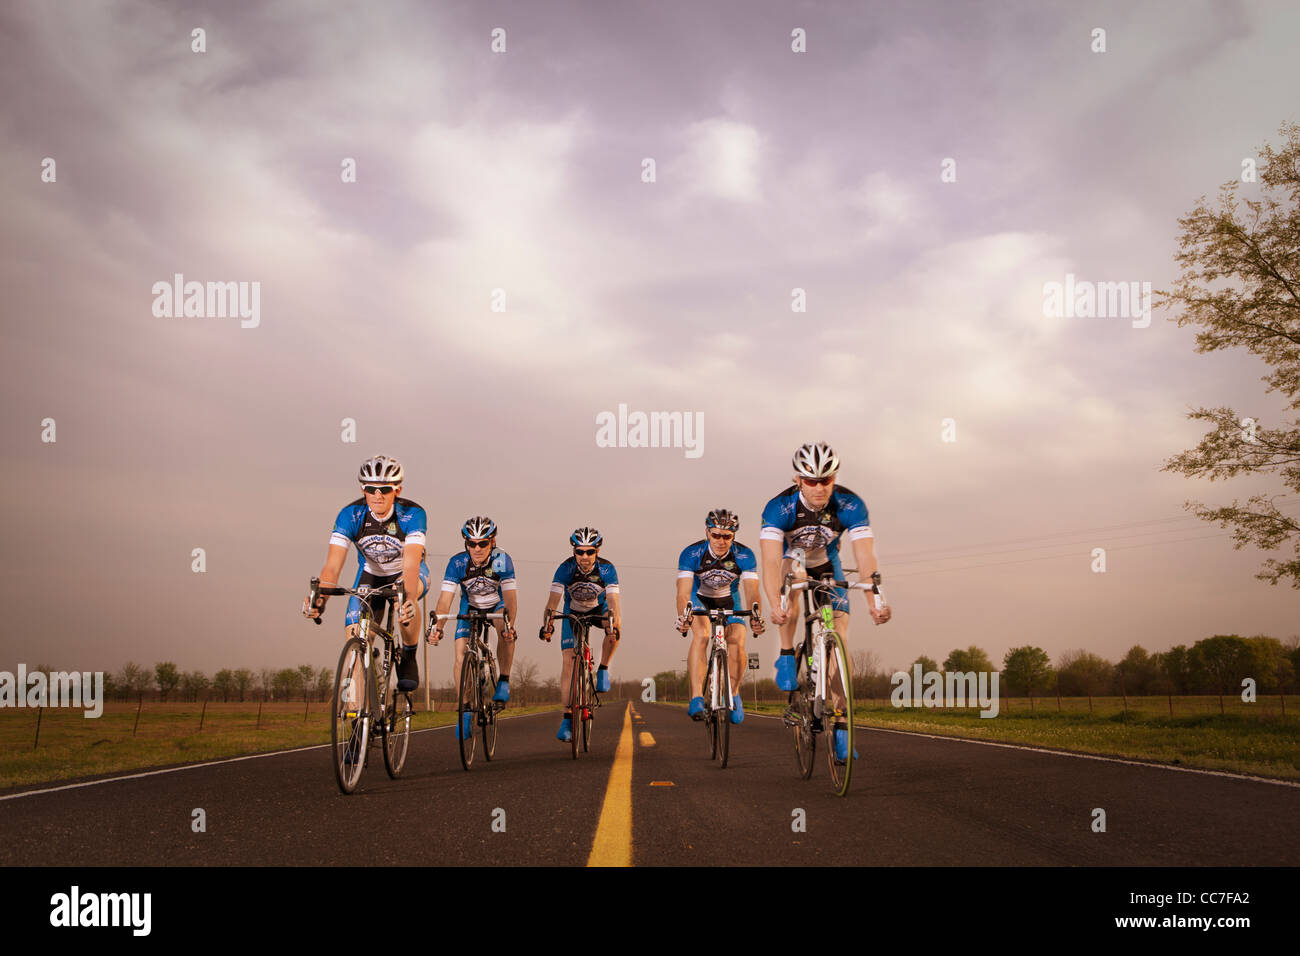 Competitive bicyclists racing on remote rode Stock Photo